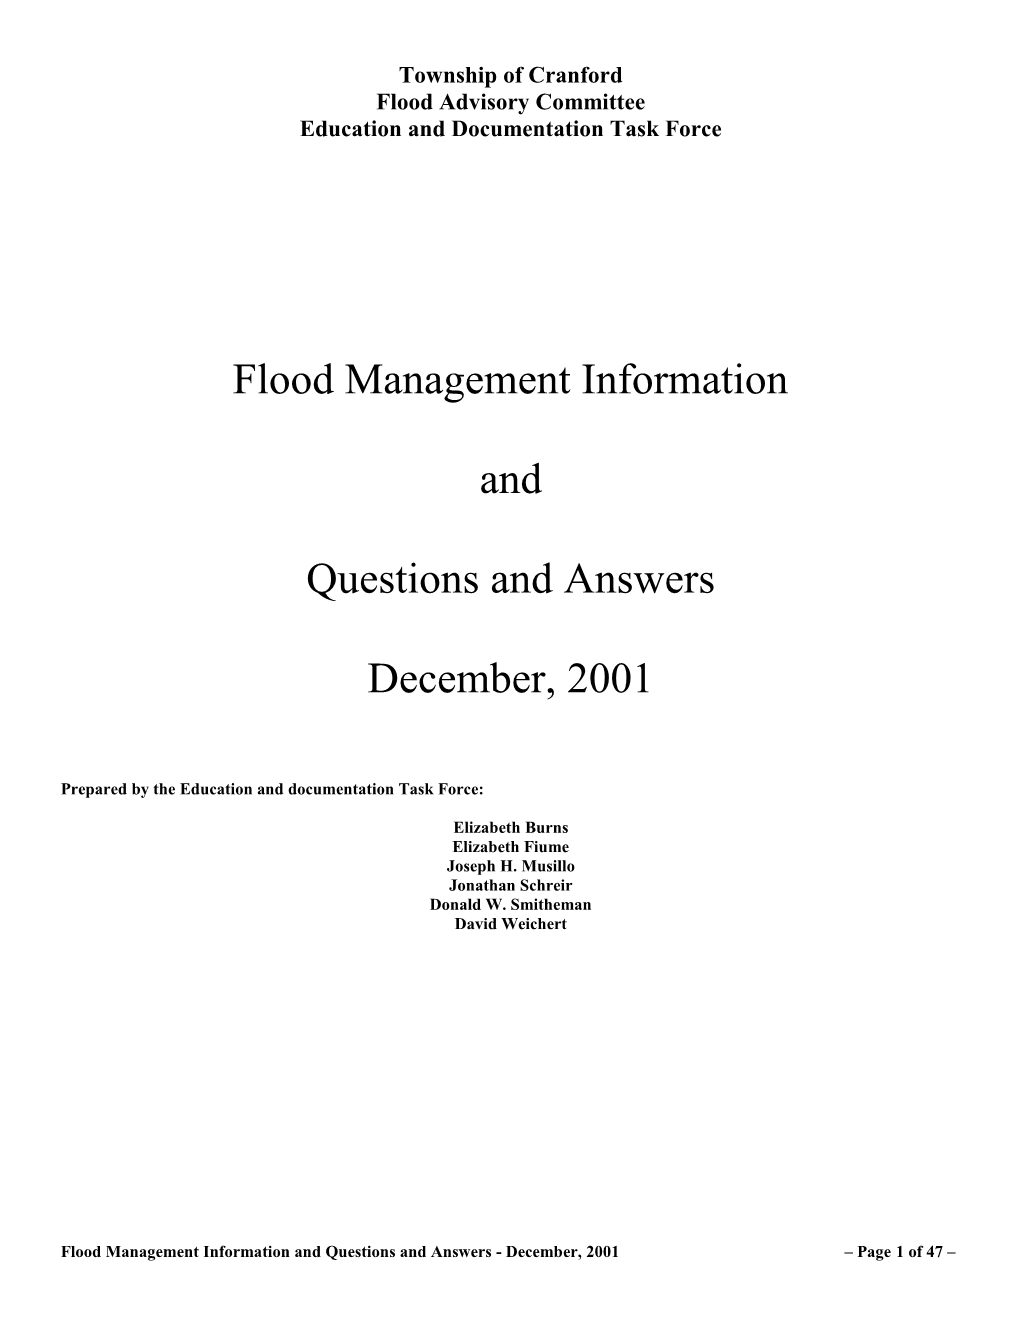 Flood Questions / Answers Information